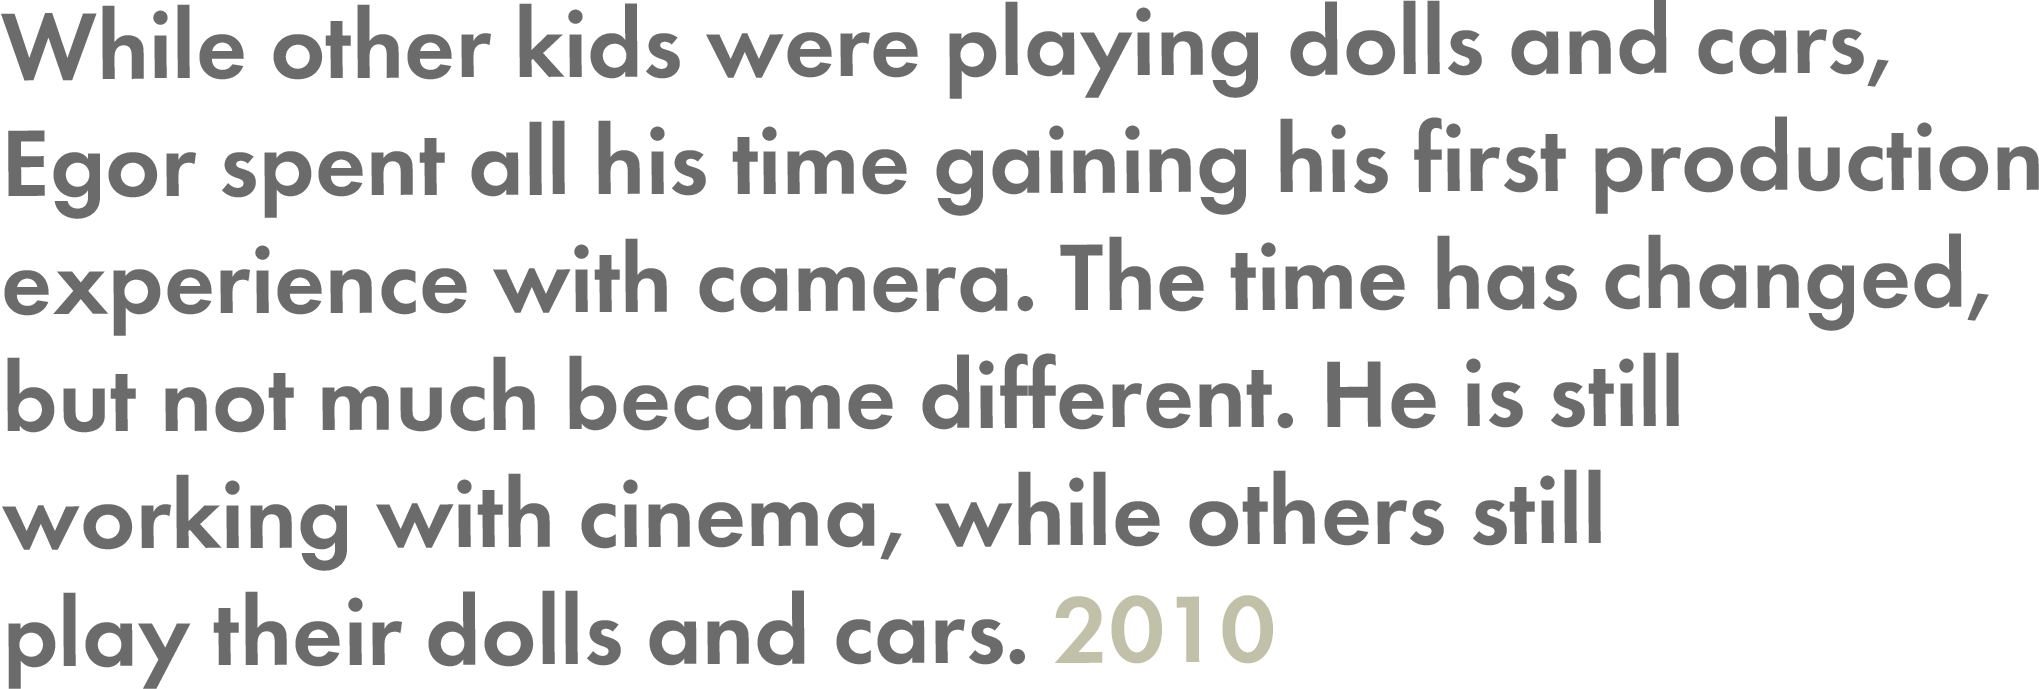 while other kids were playing dolls and cars, Egor spent all his time gaining his first production experience with camera. The time has changed, but not much became different. He is still working with cinema, while others still play their dolls and cars — 2010